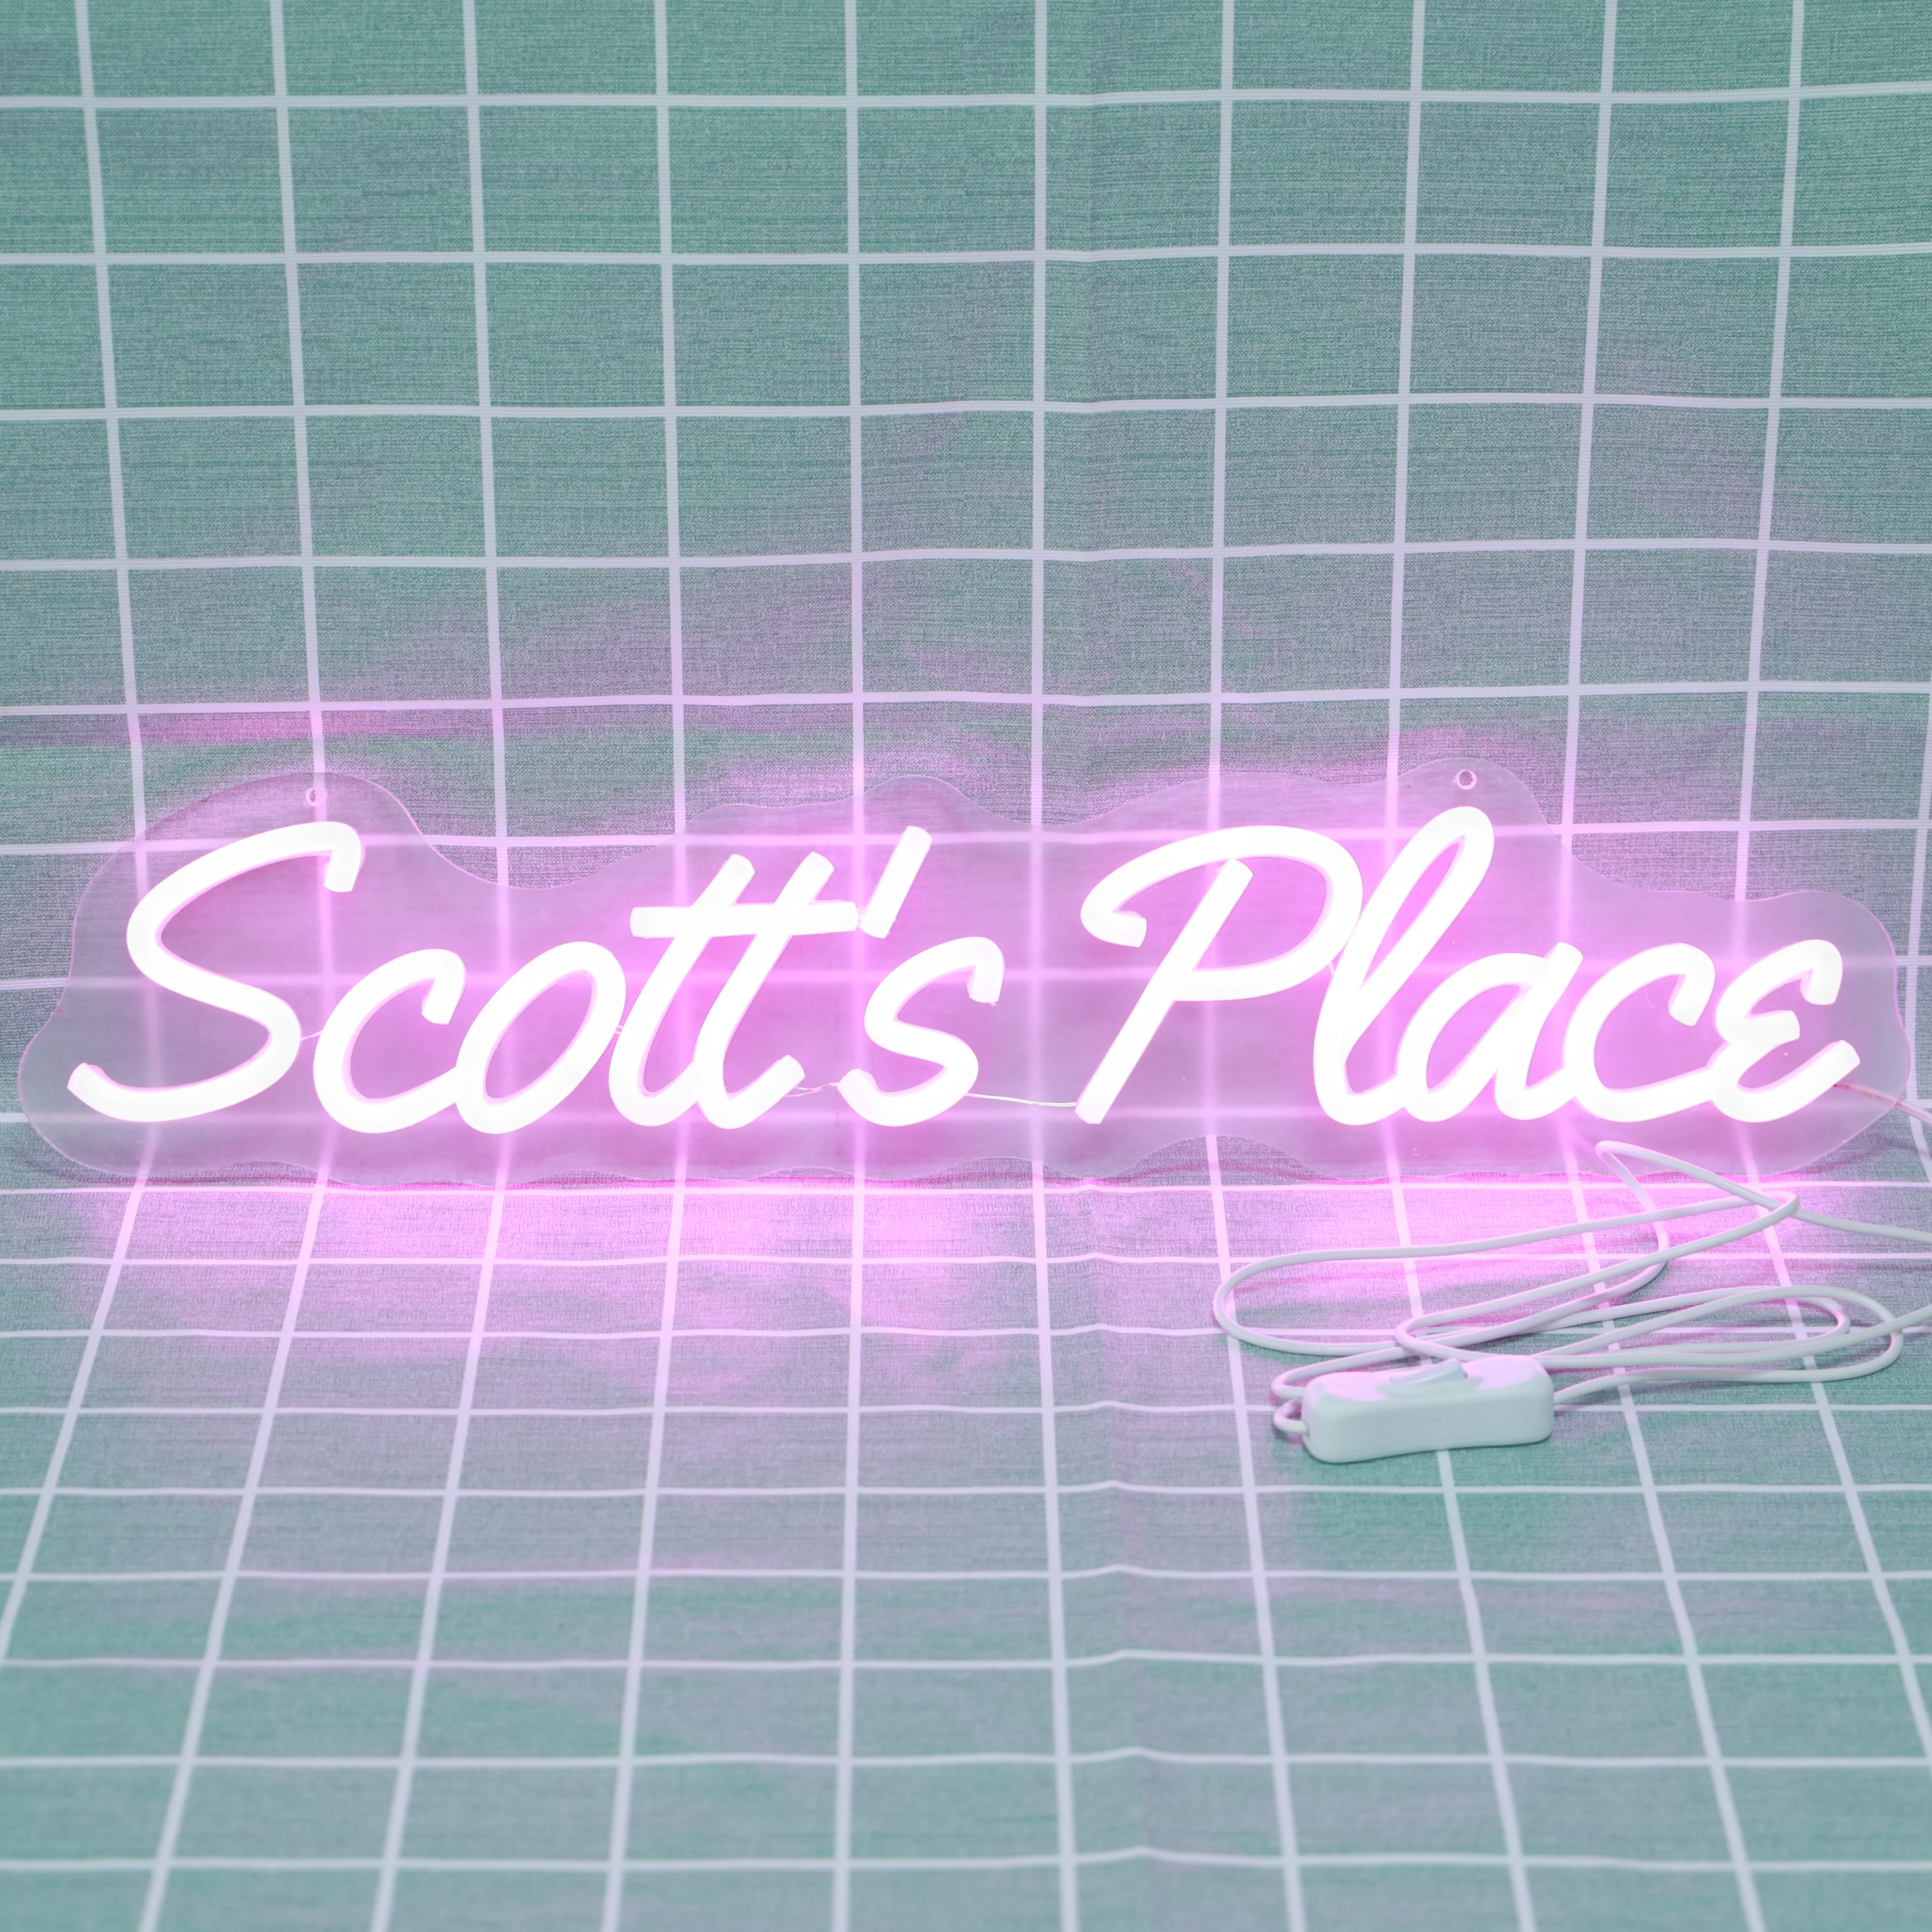 Scott's Place Neon Sign Design Led Neon Signs Light for Wedding Pub Club Home Restaurant Wall Hanging Neon Lights